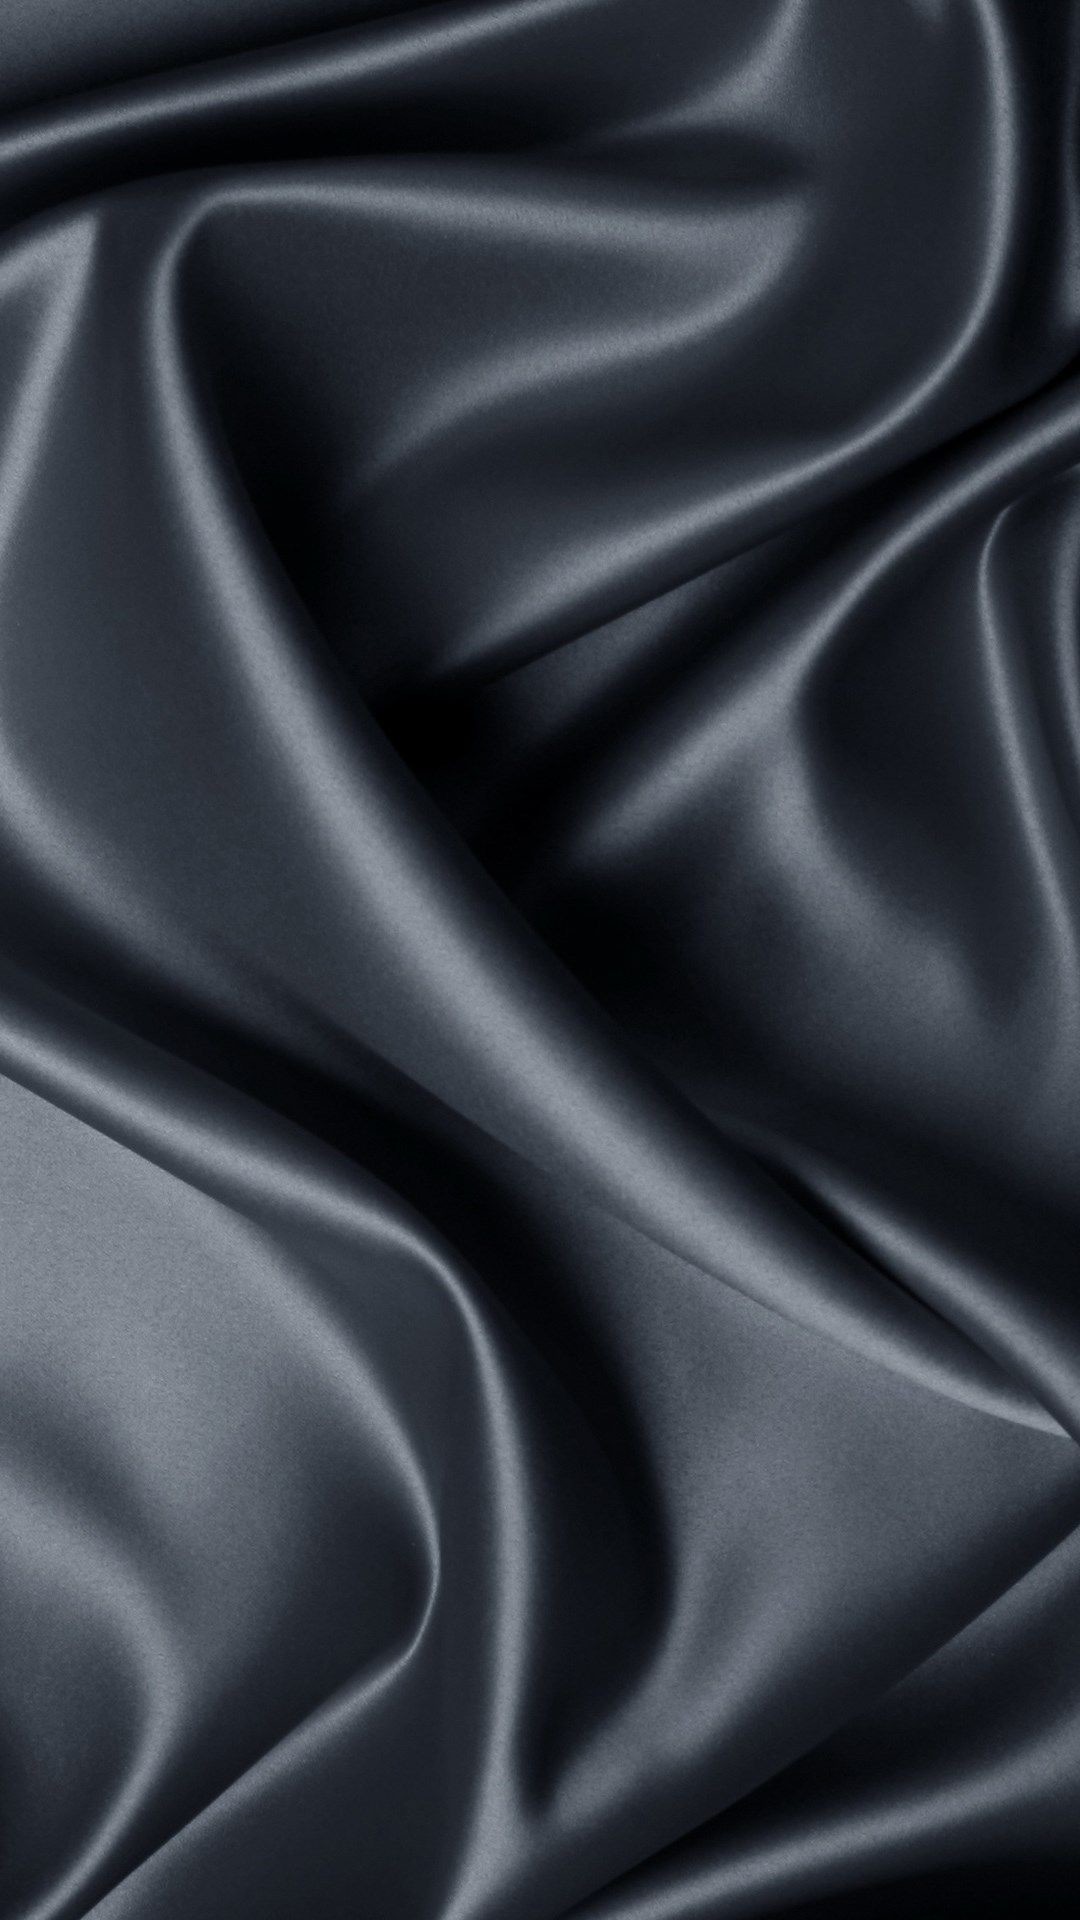 1080x1920 Black silk texture. Tap to see more Texture iPhone Wallpapers. - @mobile9  #iphone #texture #backgrounds